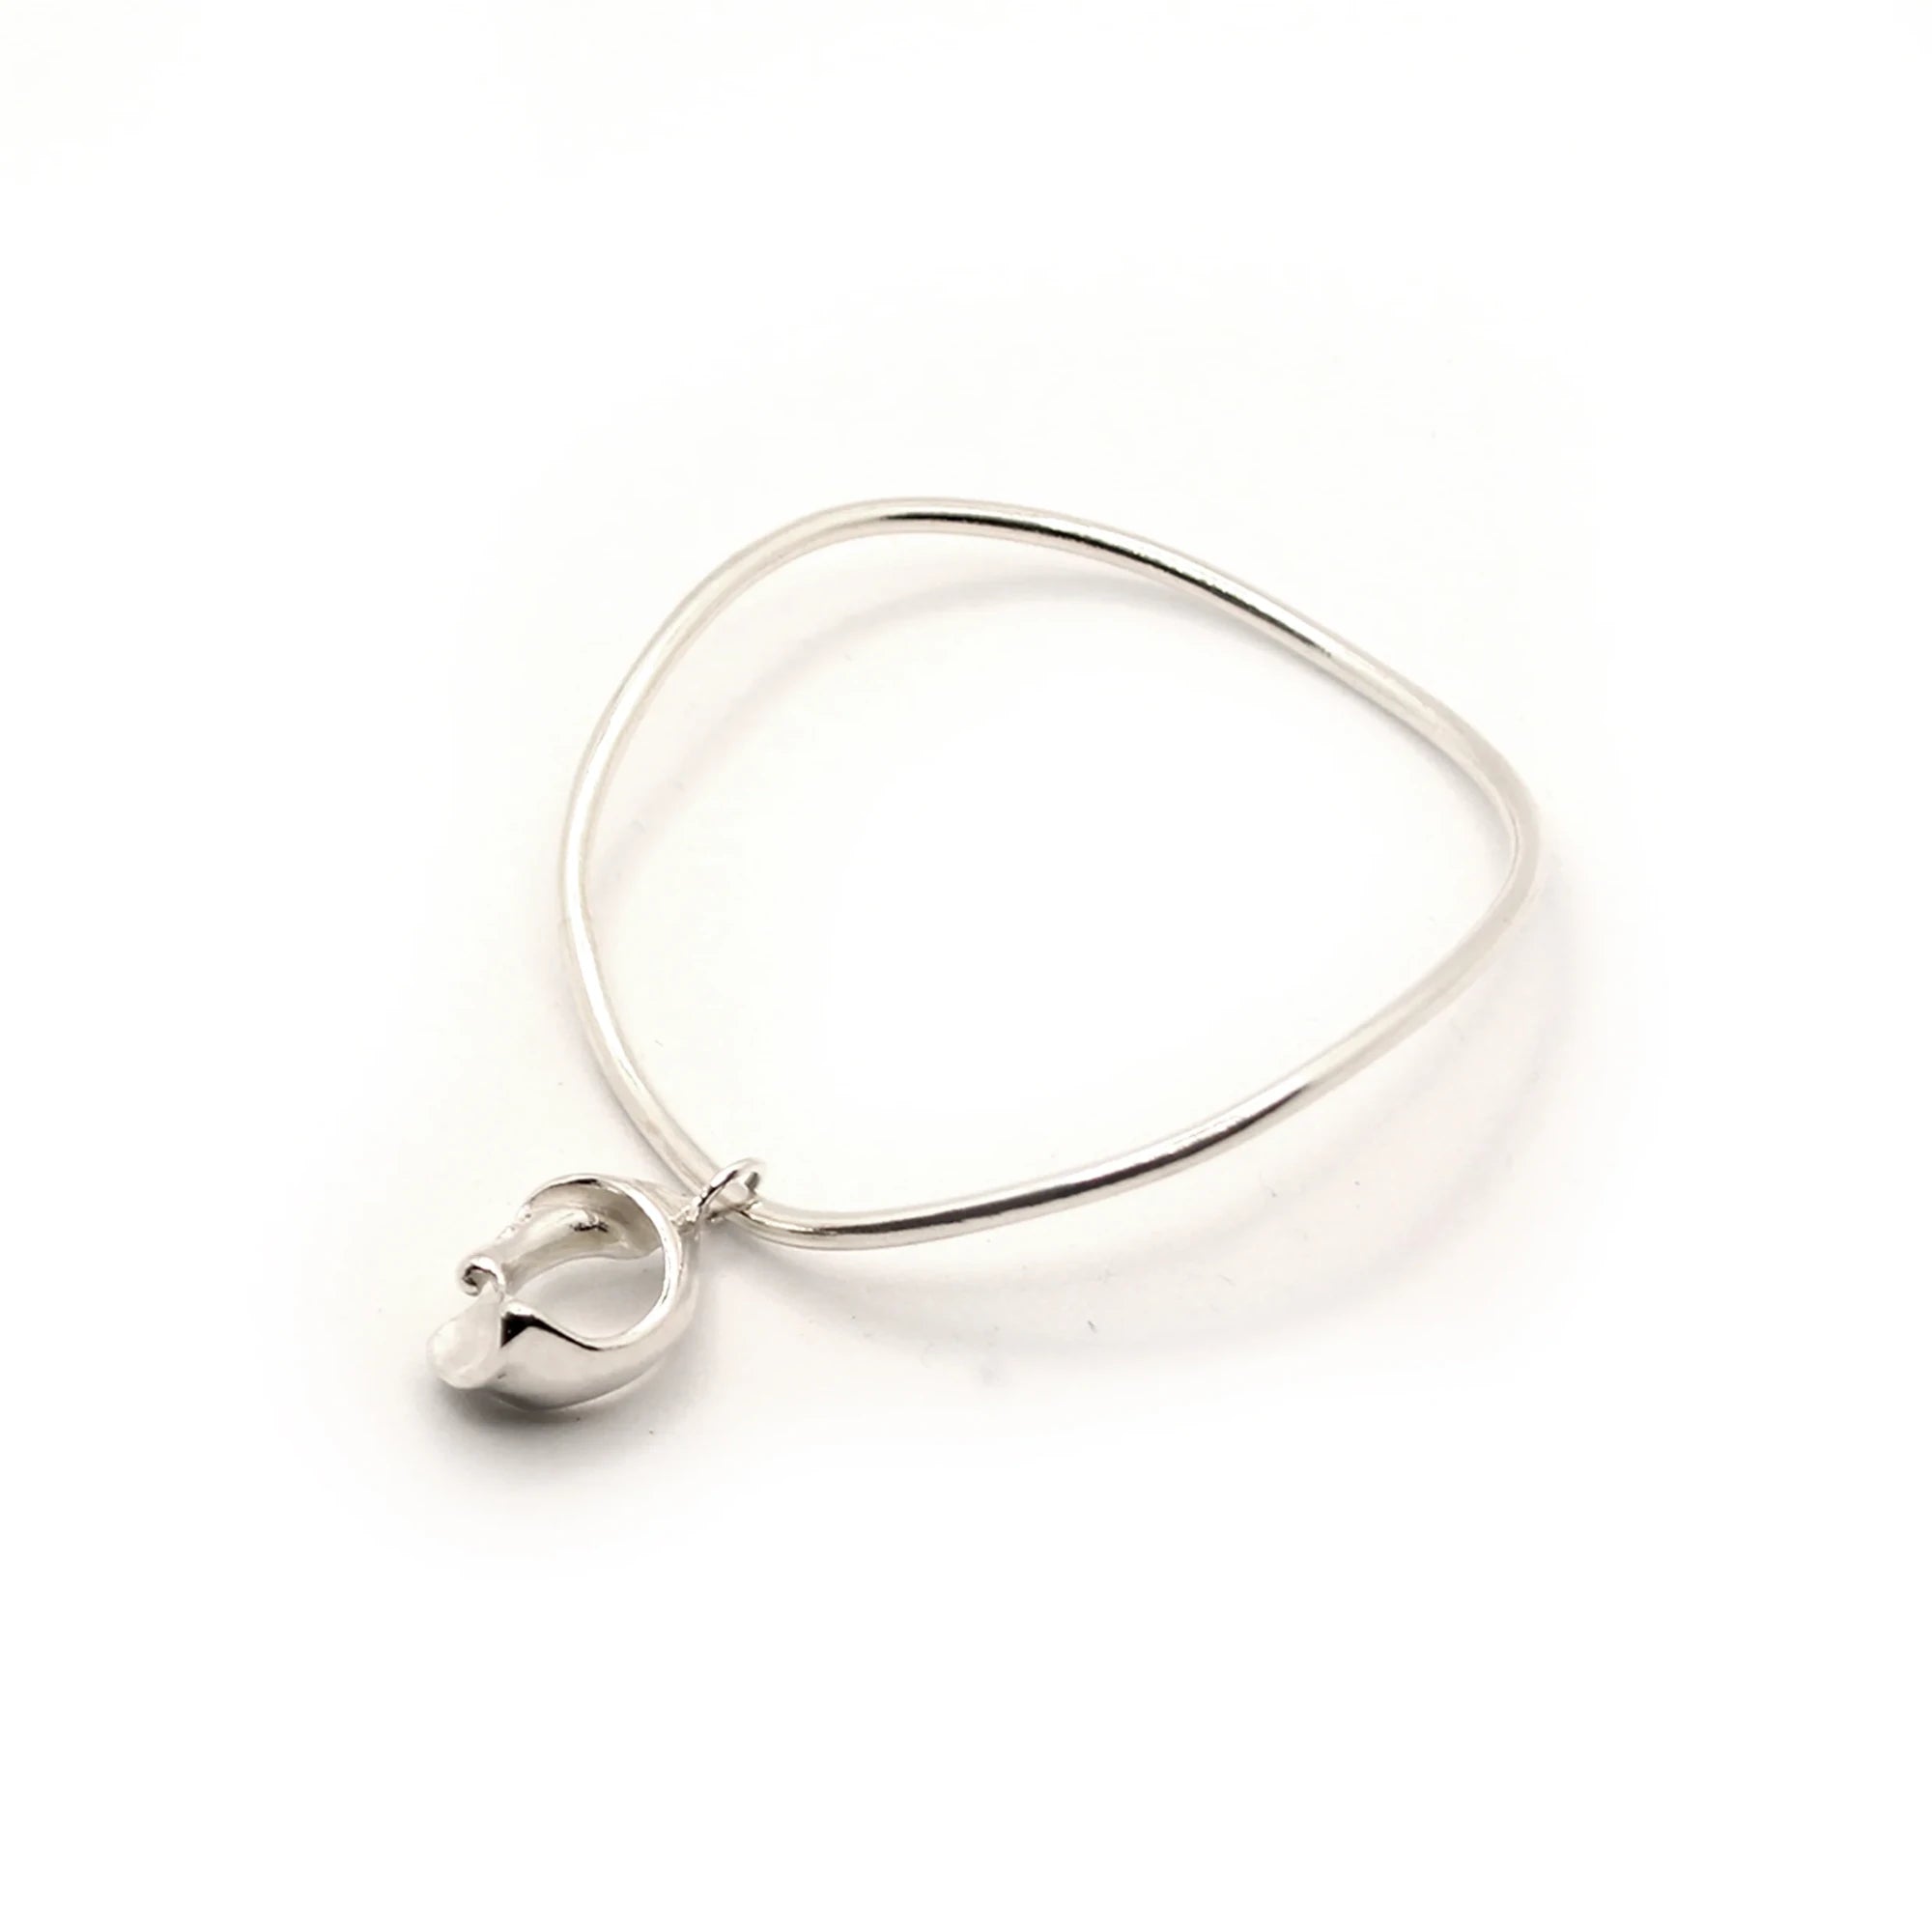 Smooth Fragmented Shell Bangle in Silver by Hannah Bourn - Lifestory